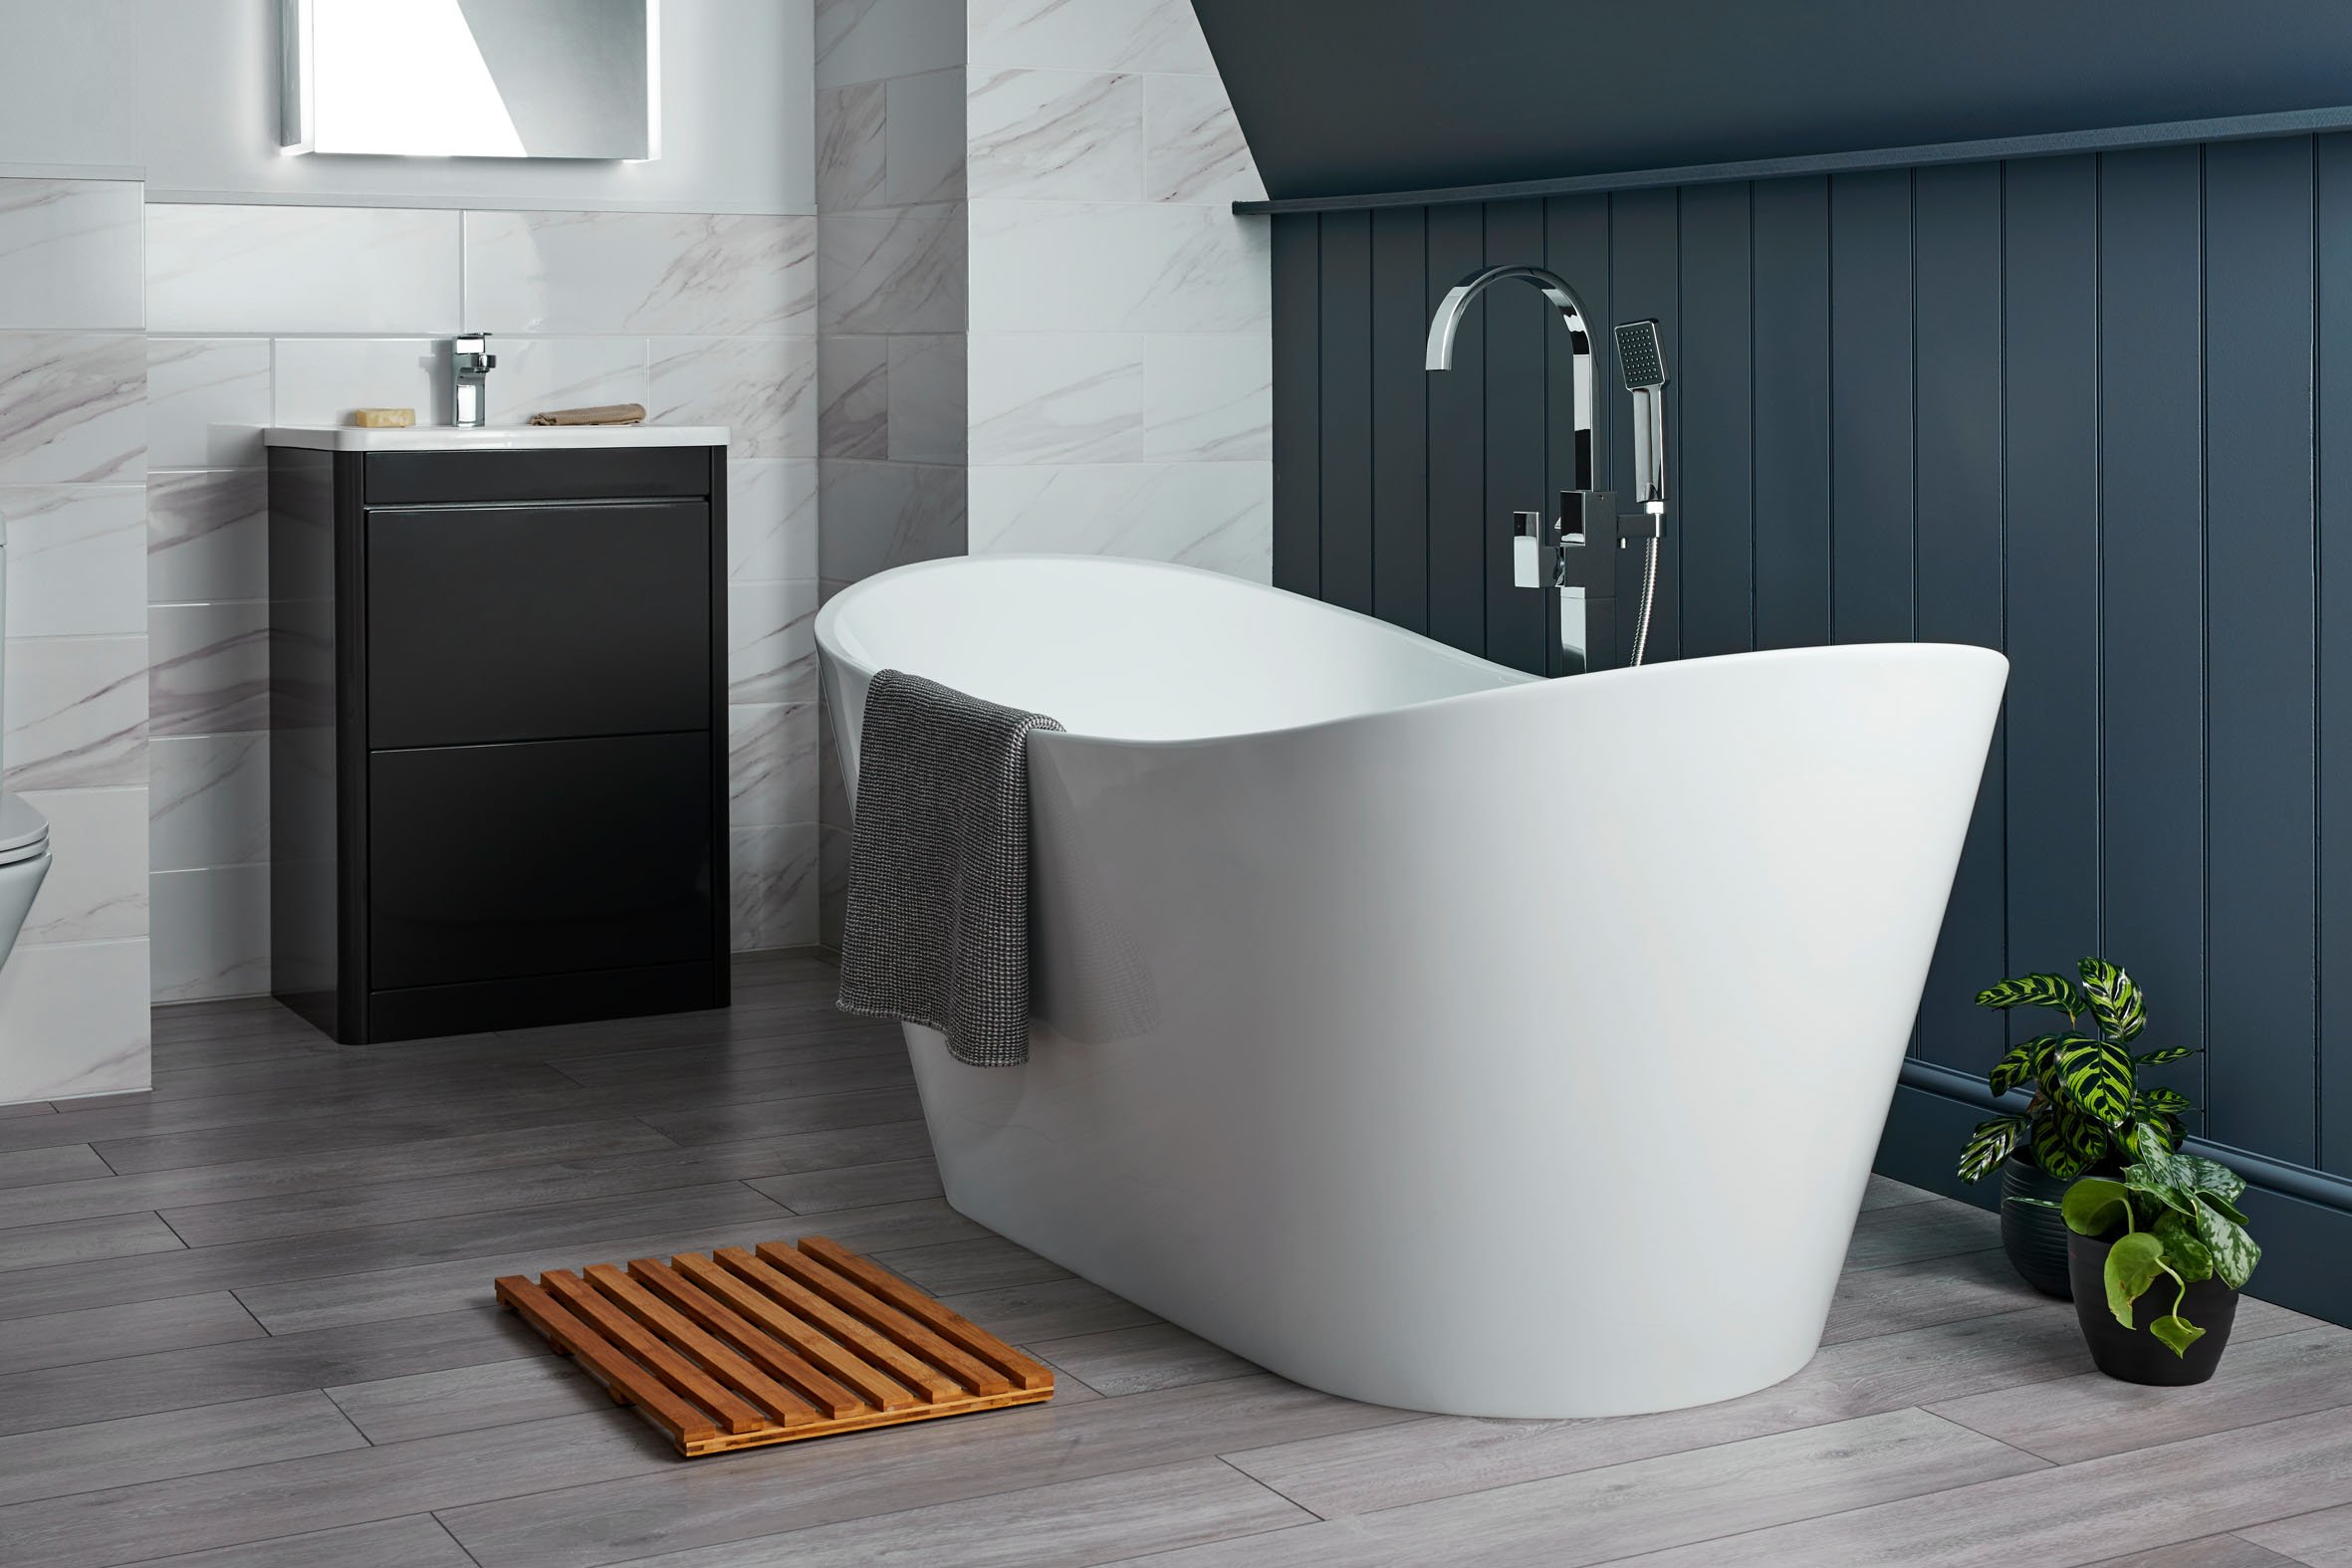 an image of a freestanding bath against a blue wall